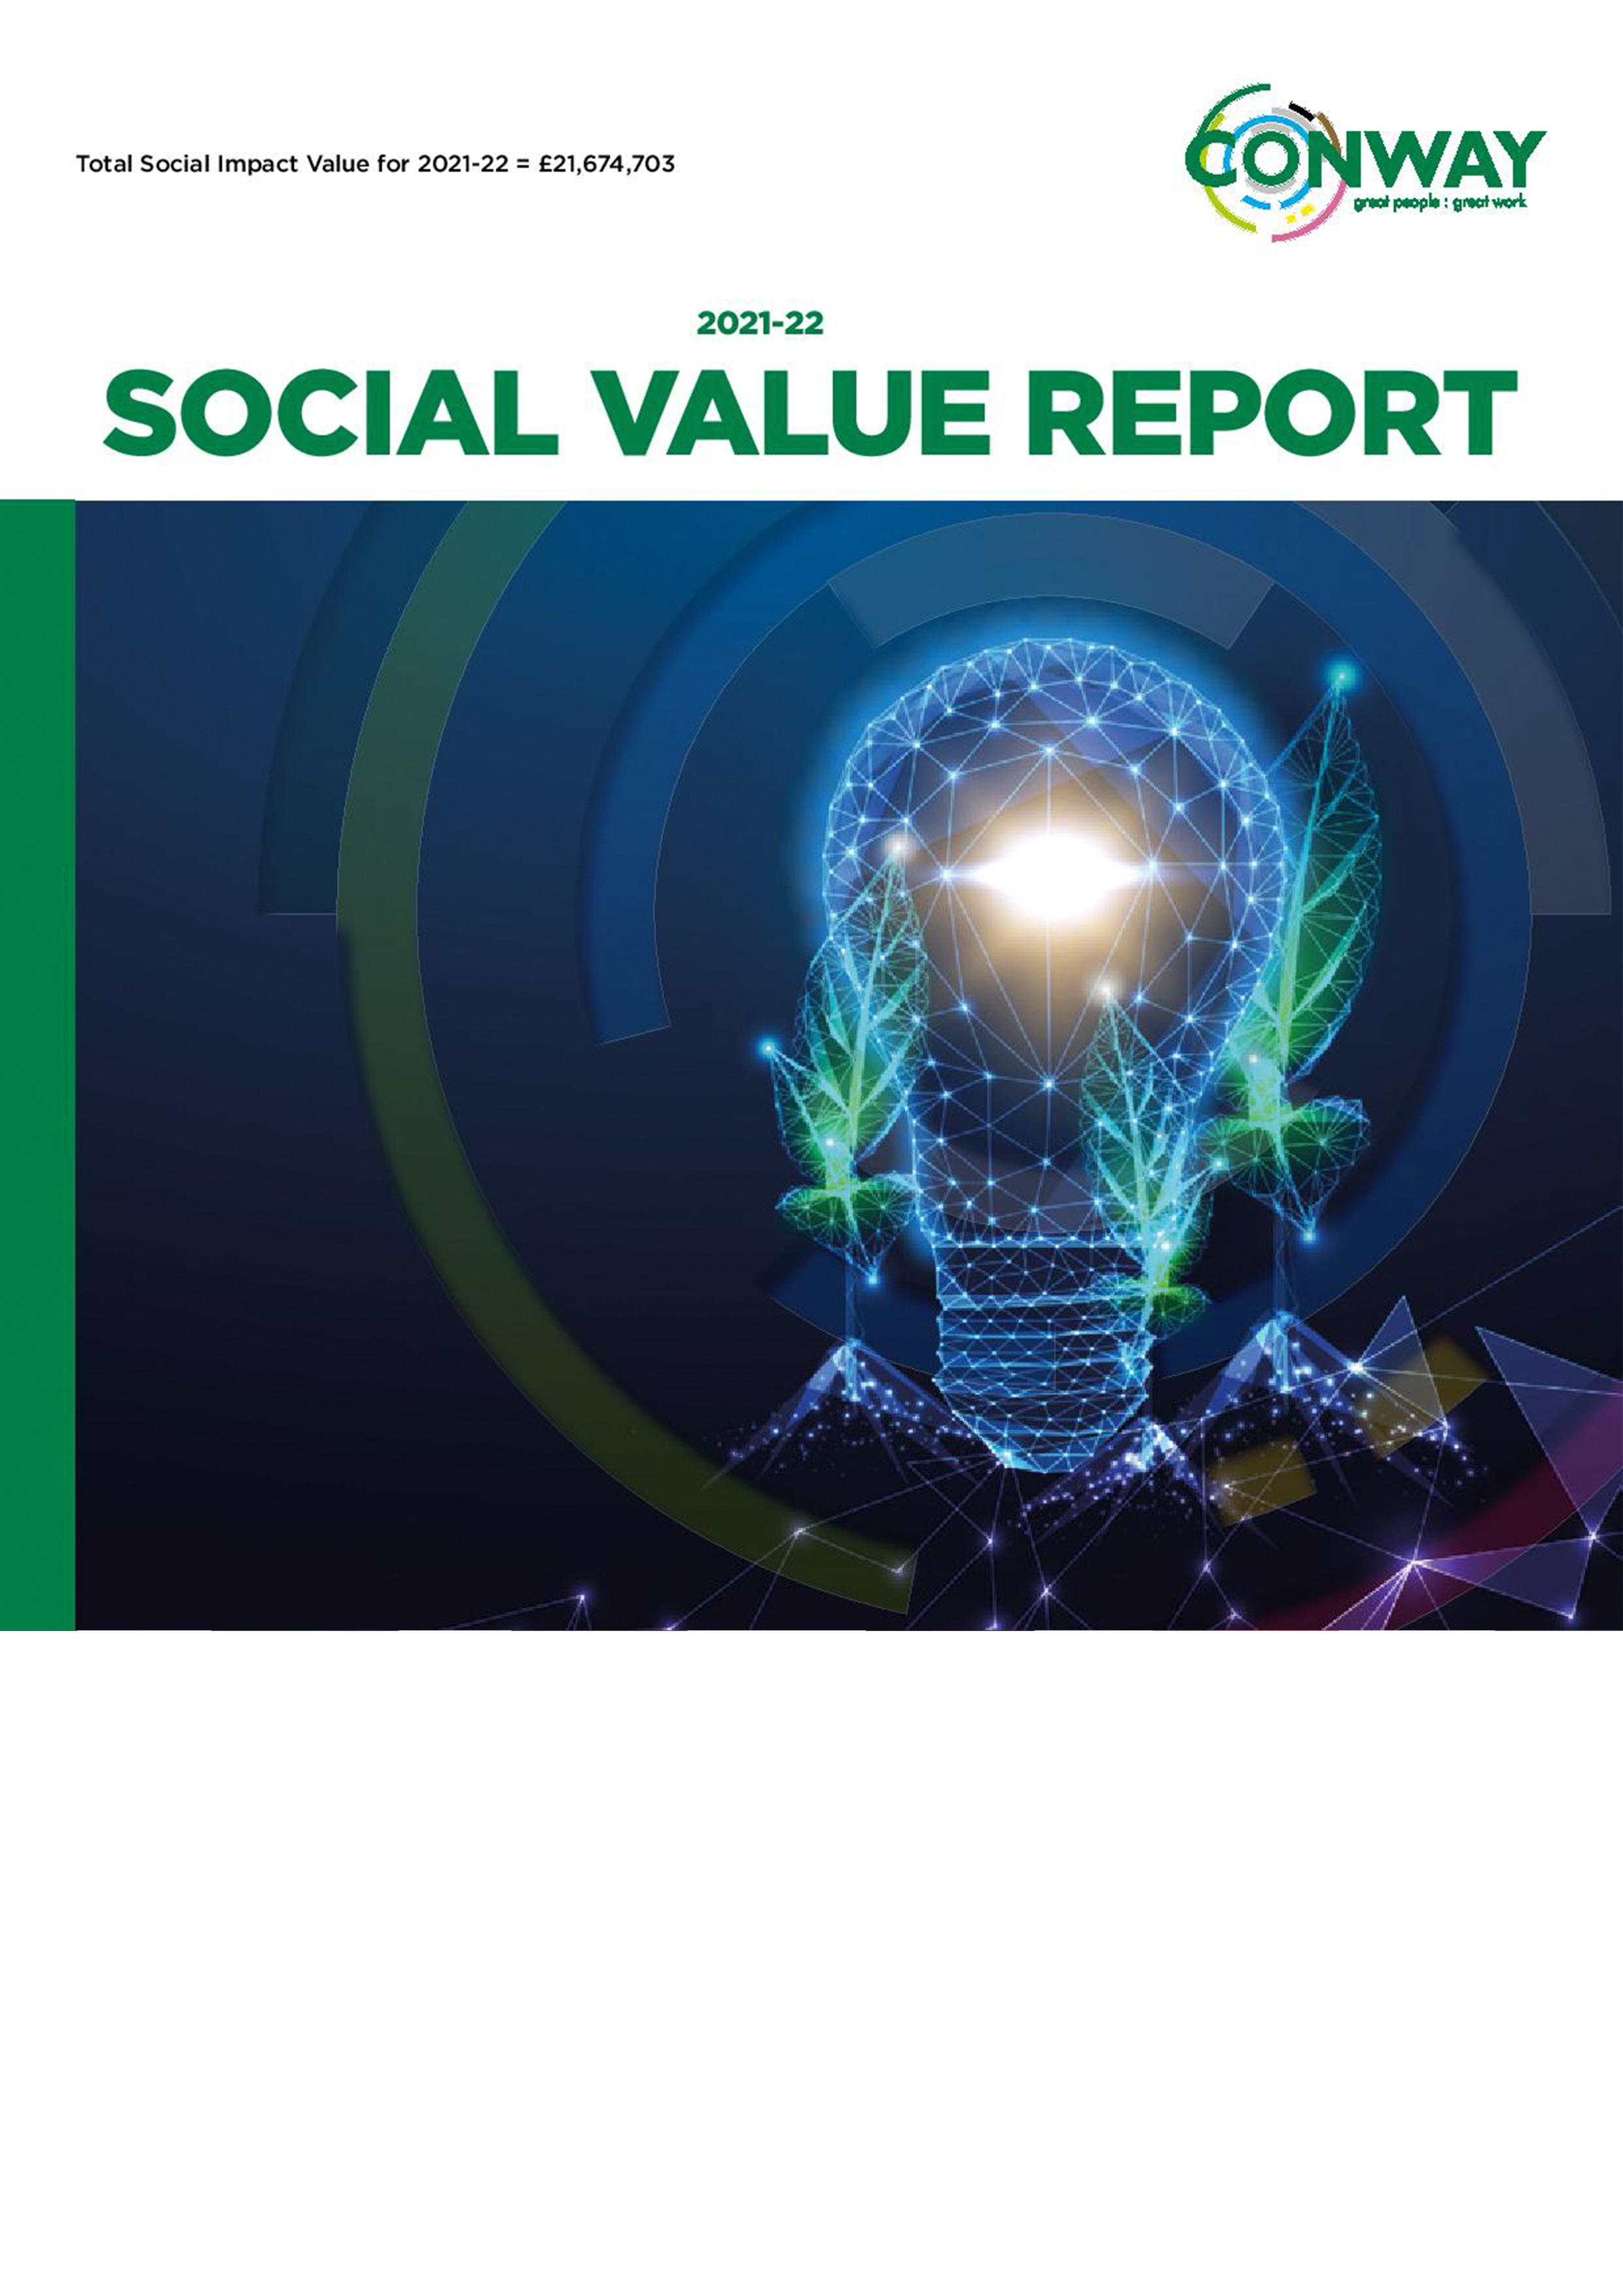 /files/library/images/CSR/Social Value Report 21-22.png